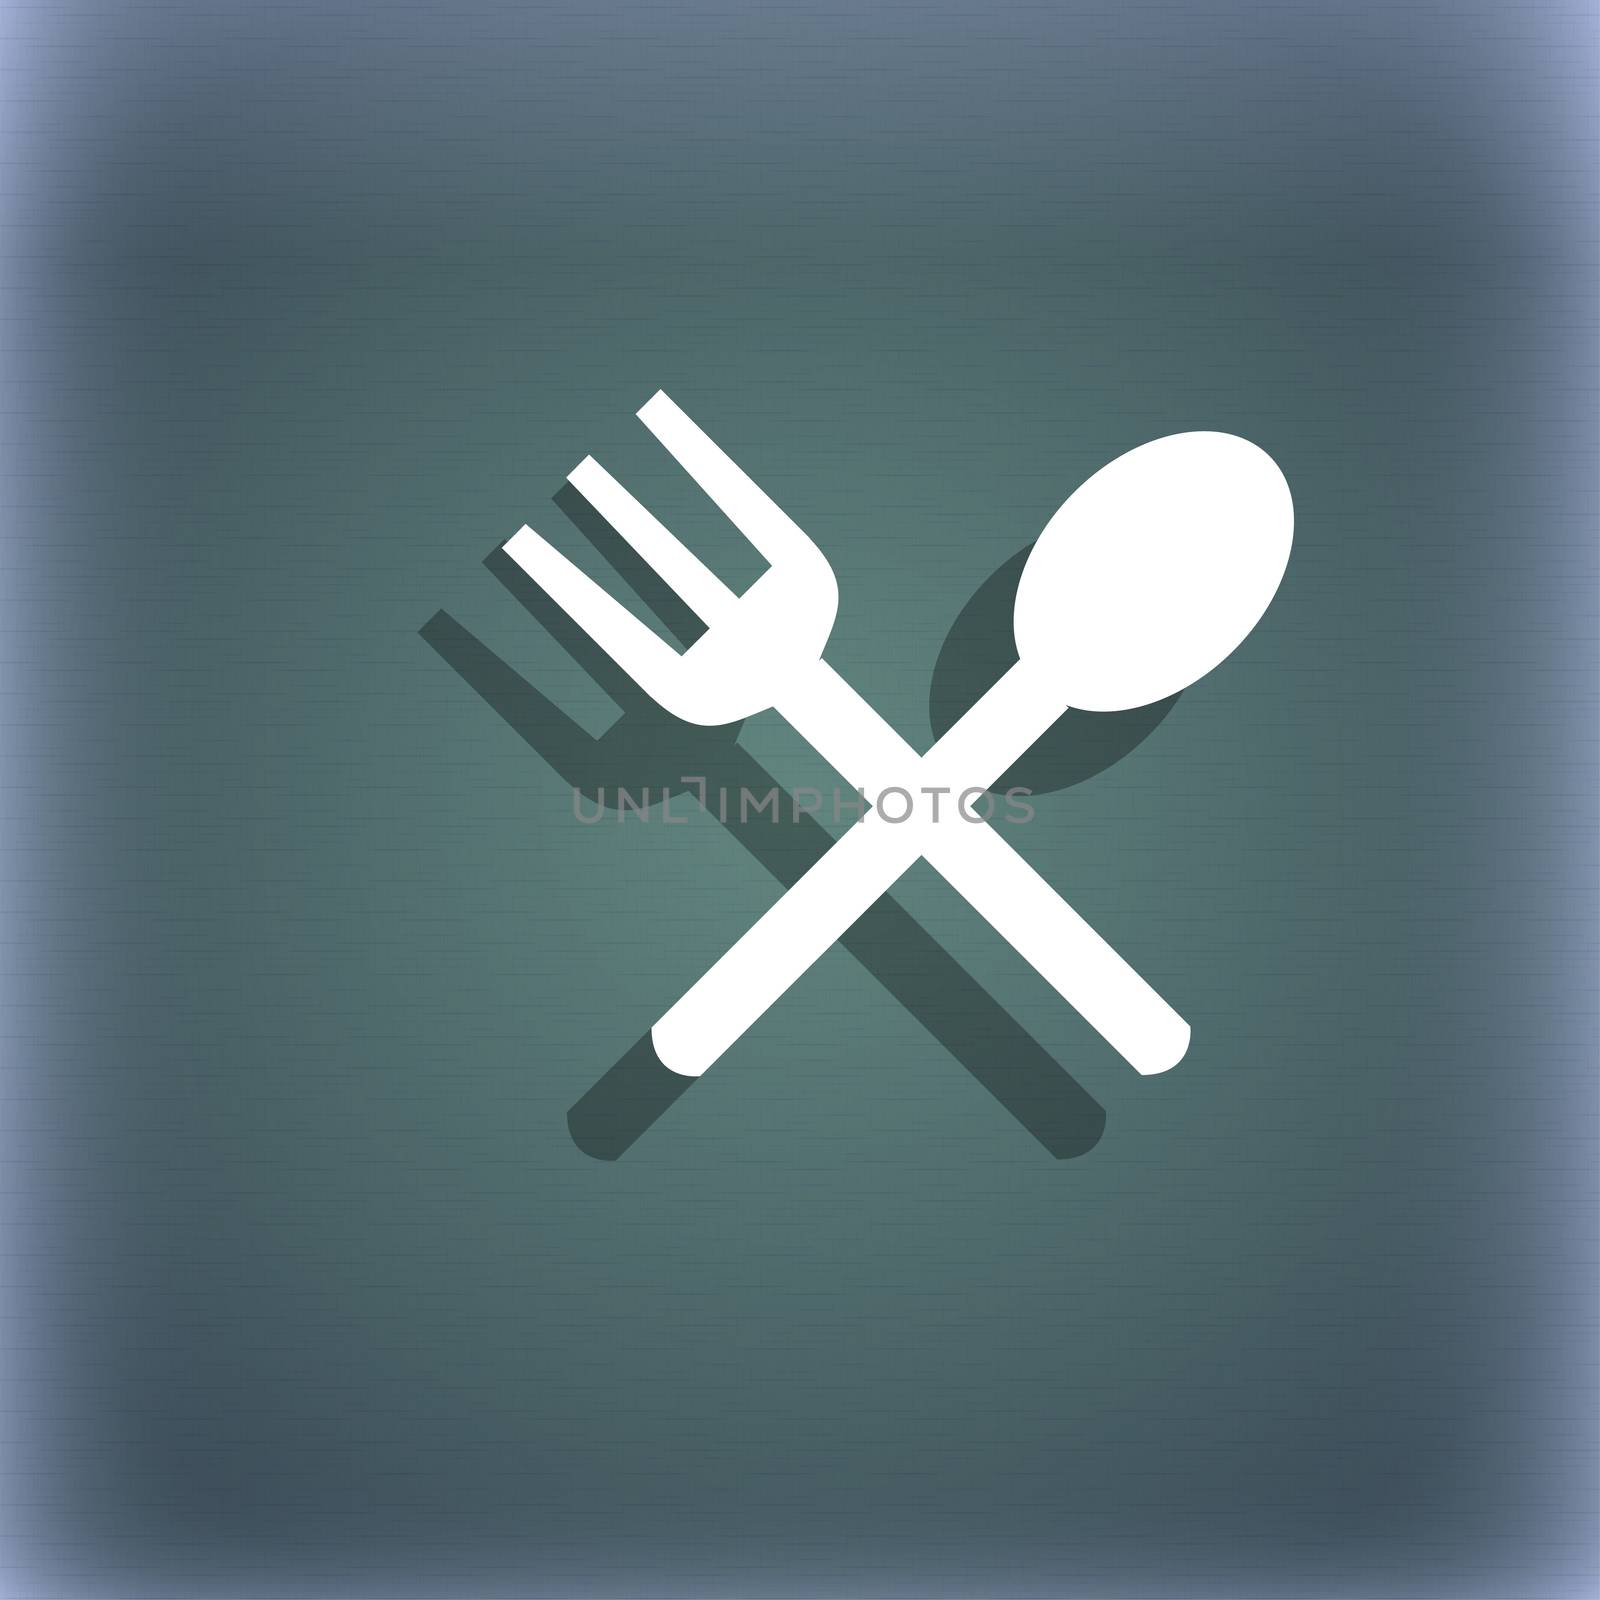 Fork and spoon crosswise, Cutlery, Eat icon sign. On the blue-green abstract background with shadow and space for your text. illustration